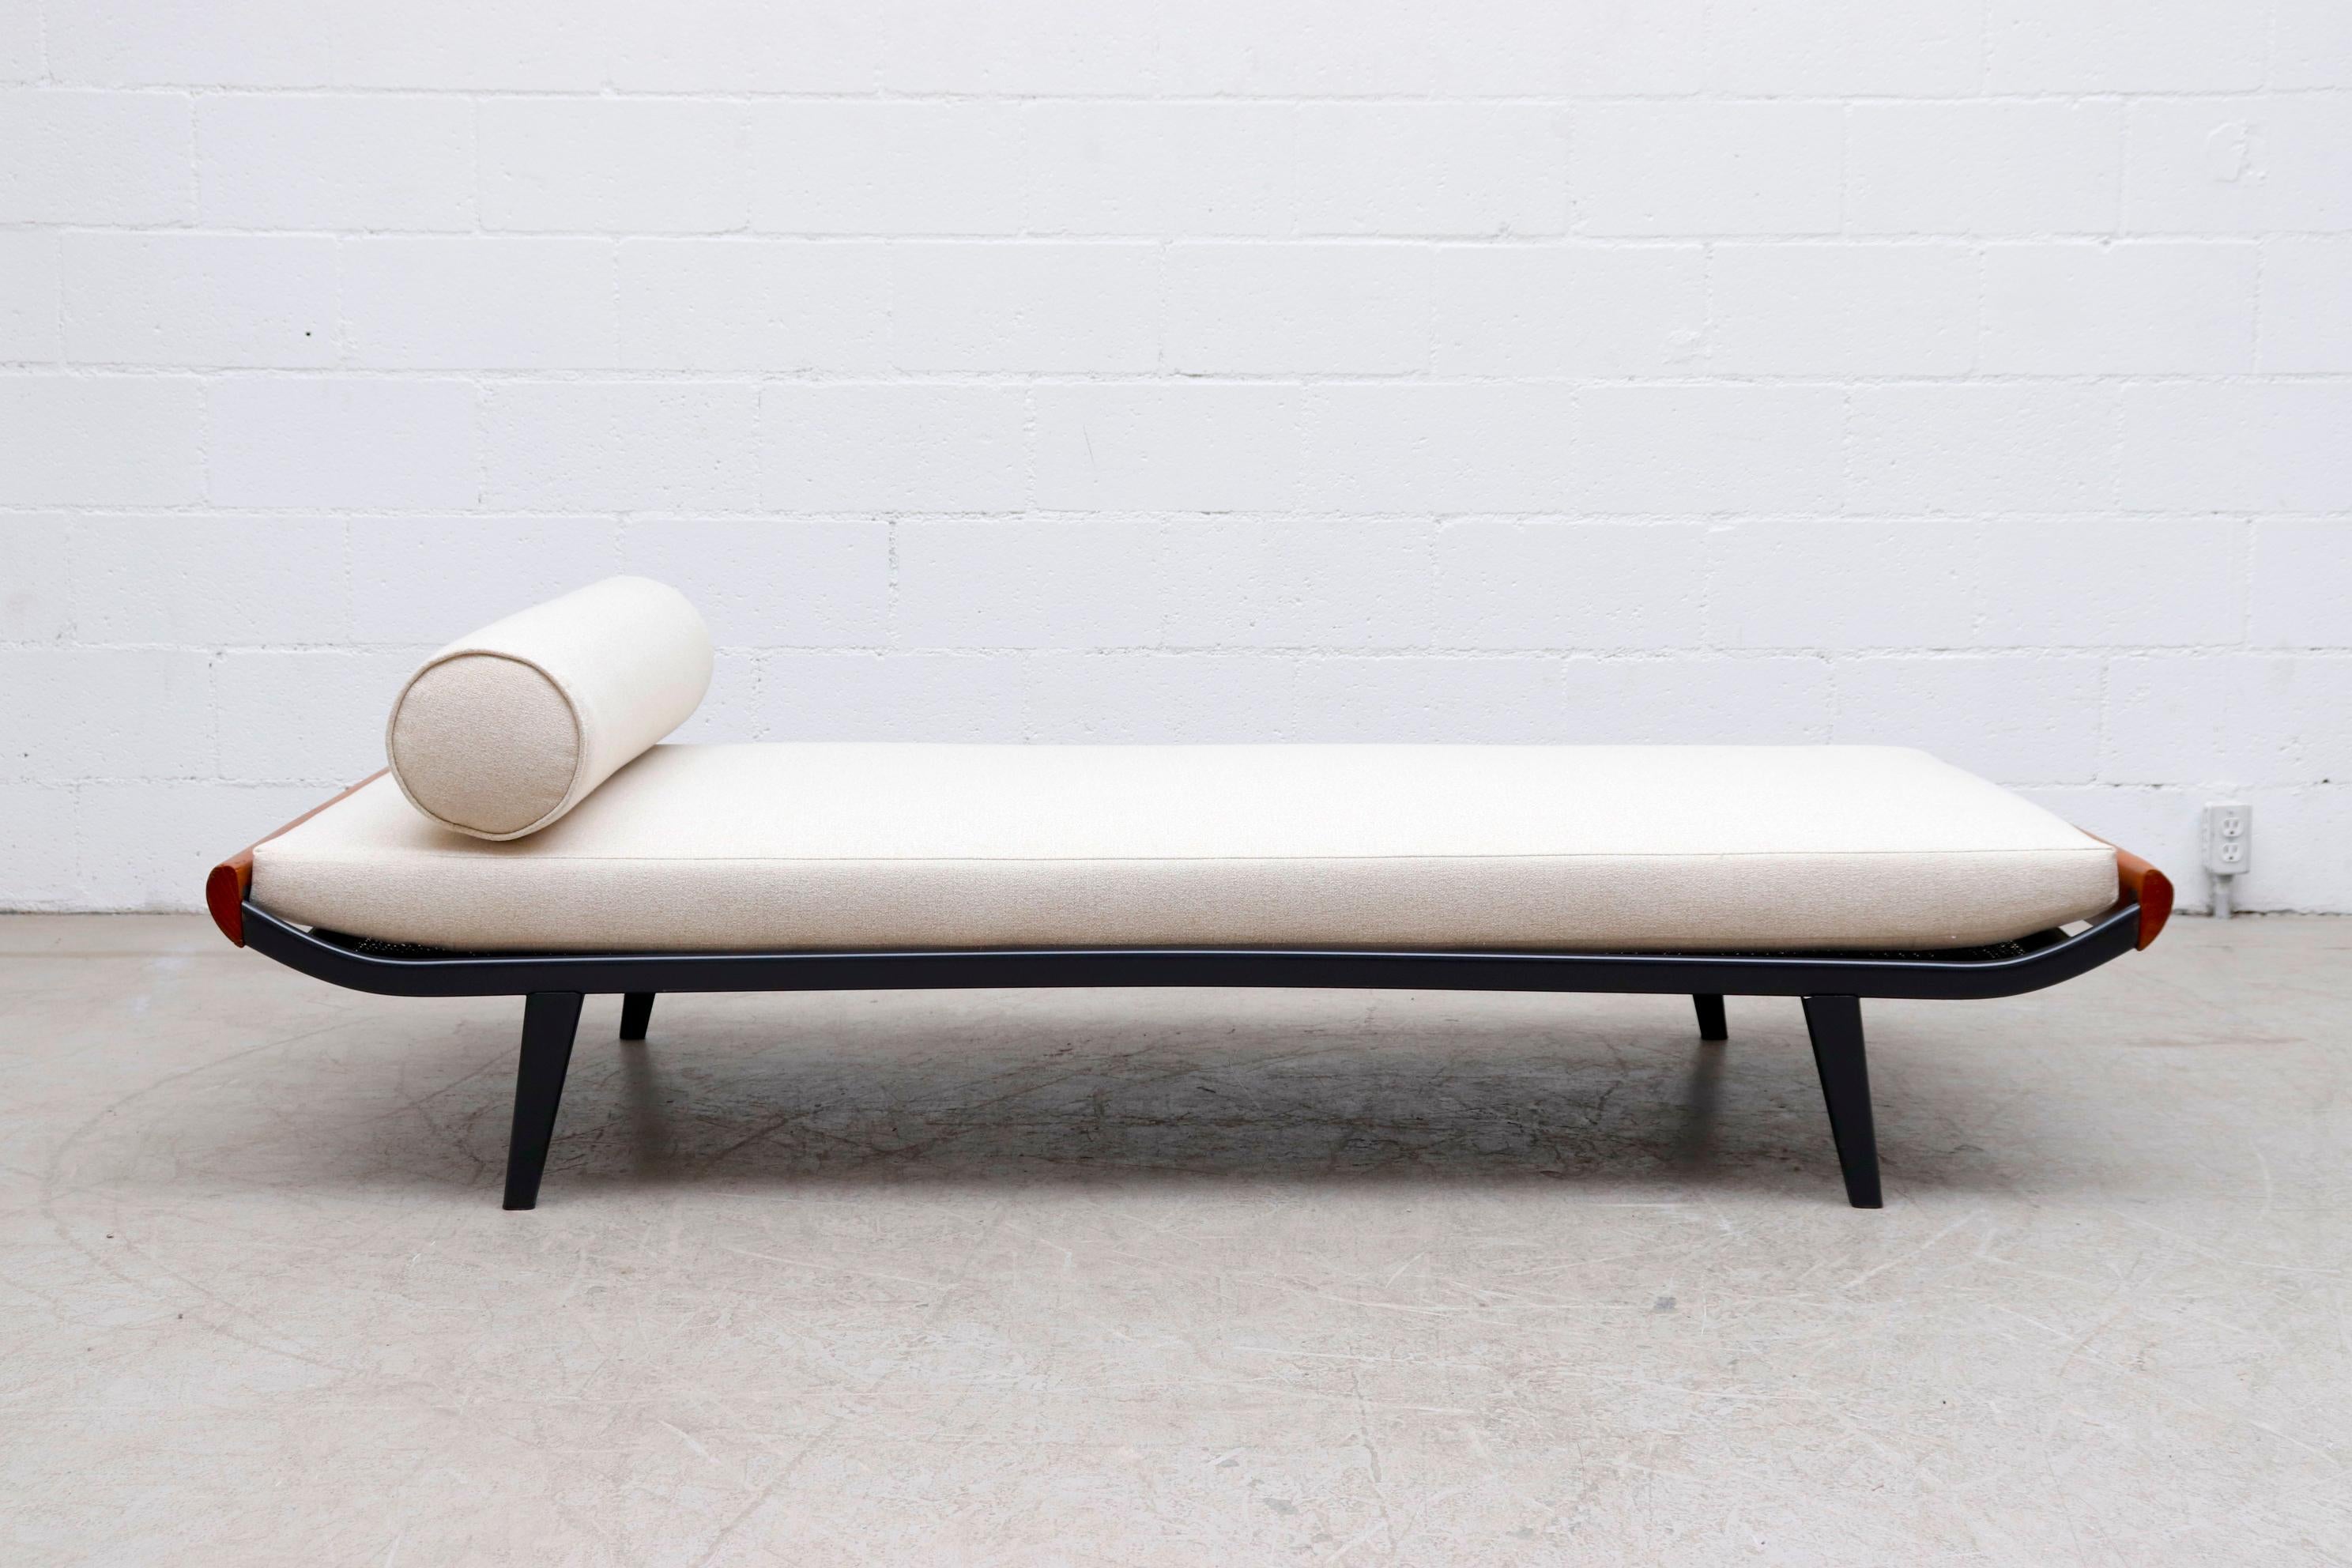 Beautiful 1960s Cleopatra daybed by A.R. Cordemeyer. Lightly refinished teak wood ends with dark grey metal enameled frame and 'Auping' tag on mesh springs with new beige mattress and matching bolster. Frame in original condition with visible